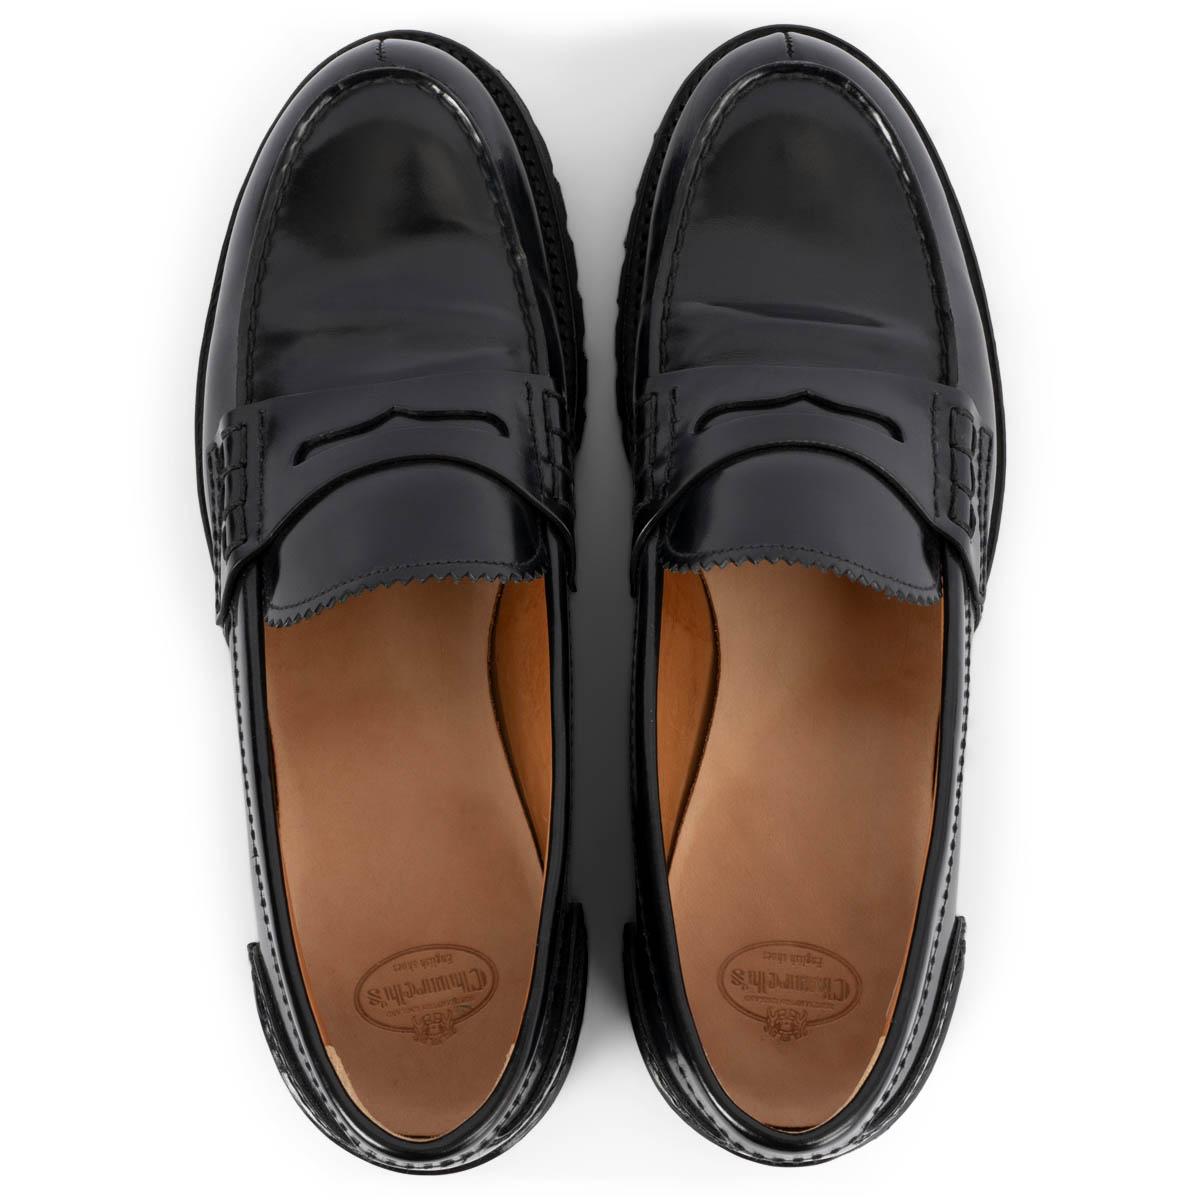 CHURCH'S black shiny leather CHUNKY Loafers Flats Shoes 39.5 1